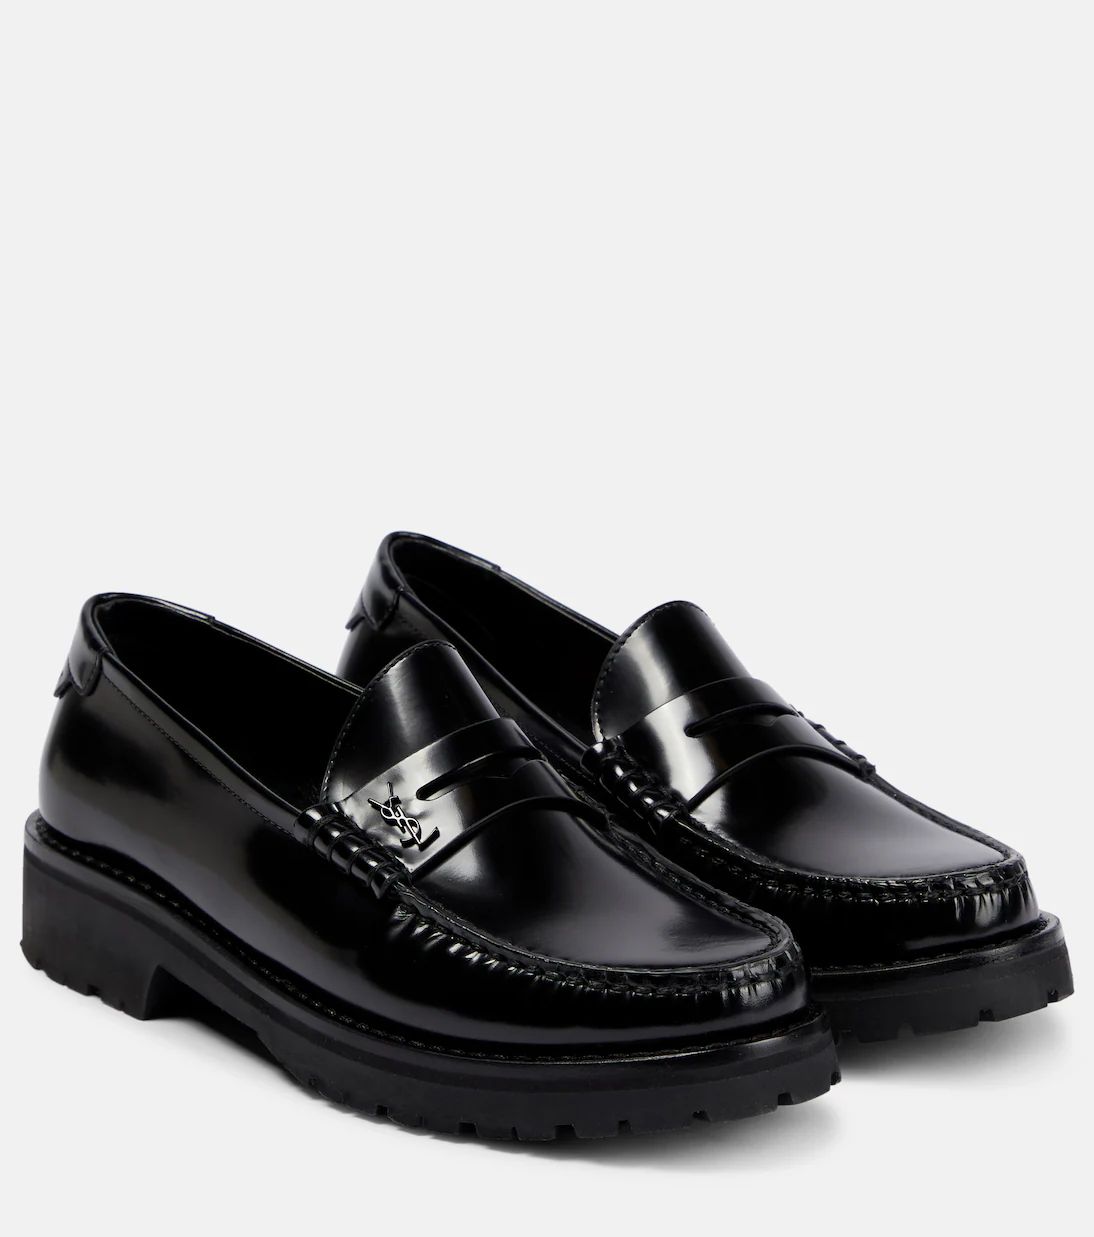 Le Loafer leather penny loafers | Mytheresa (INTL)